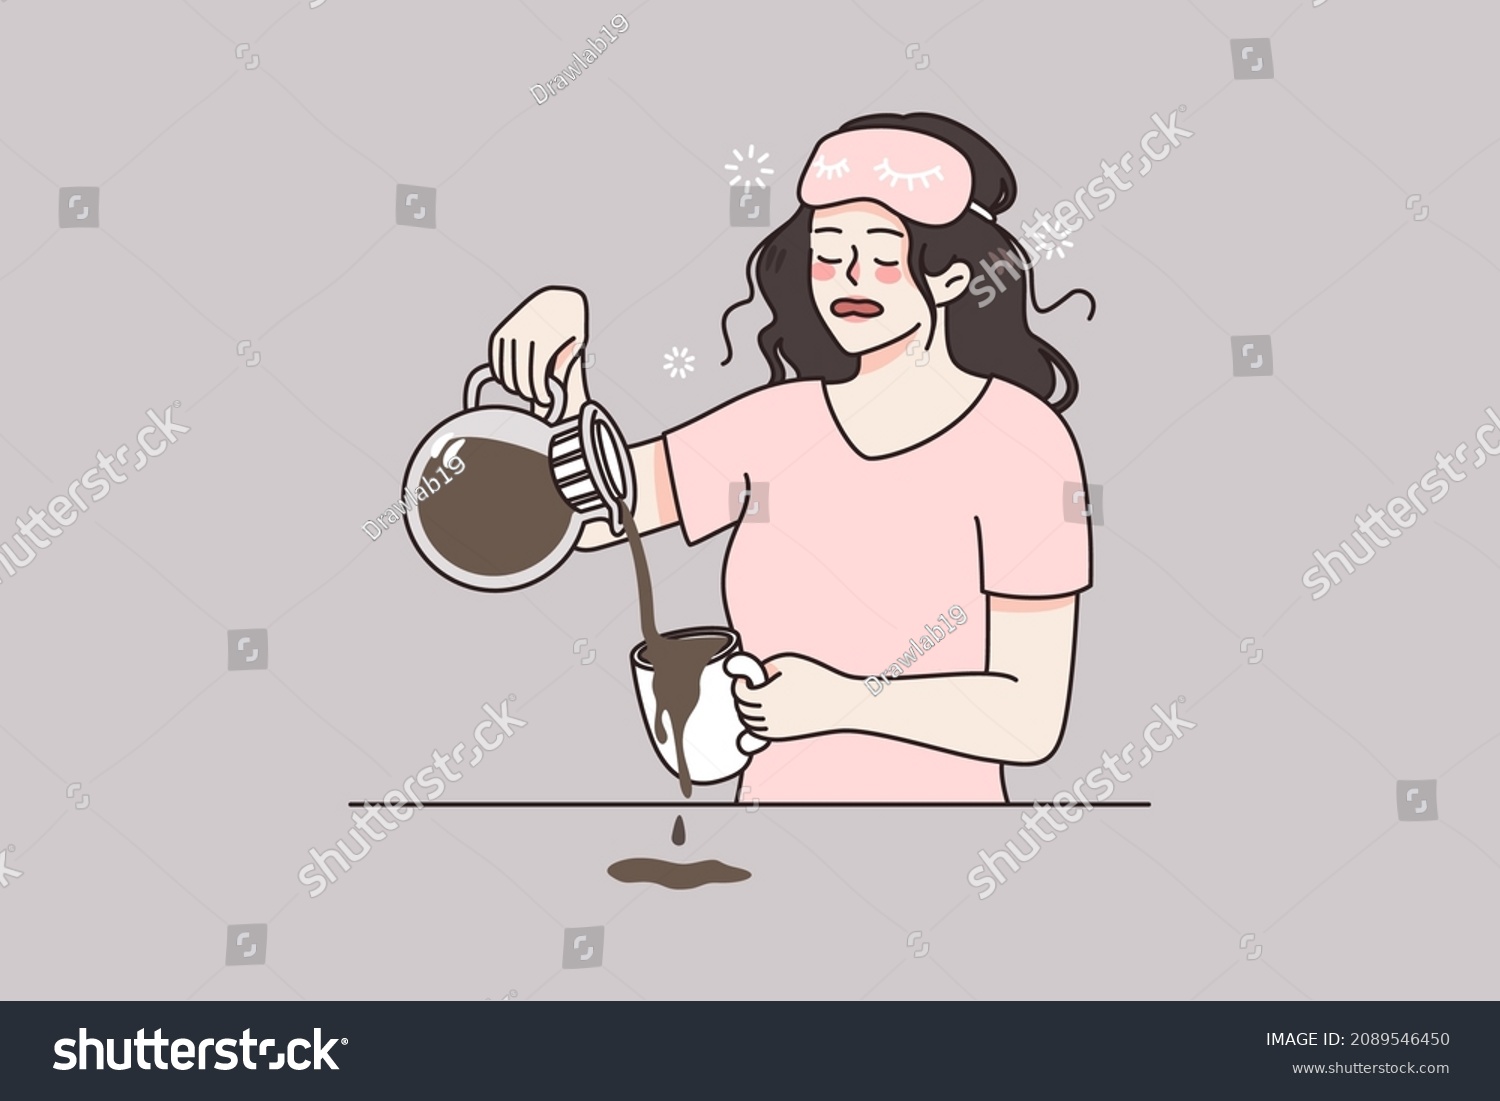 Sleepy tired young woman make coffee in morning feel fatigue after sleepless night. Drowsy girl exhausted need sleep relaxation. Early wakeup and exhaustion. Stress and burnout. Vector illustration.  #2089546450